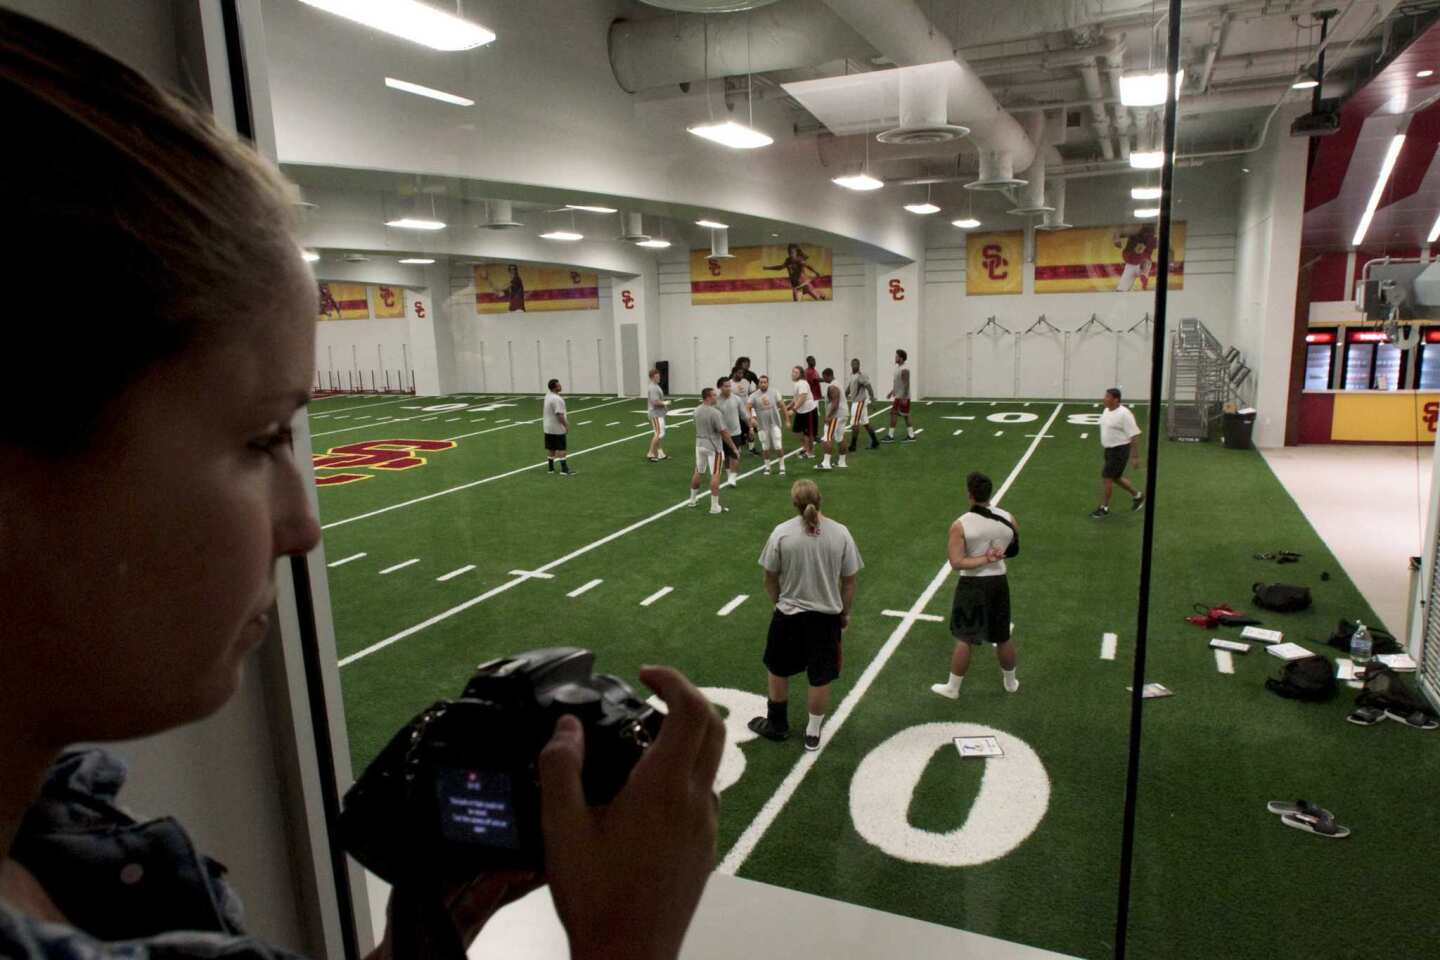 The new John McKay Center at USC includes and an indoor turf field for football practice.